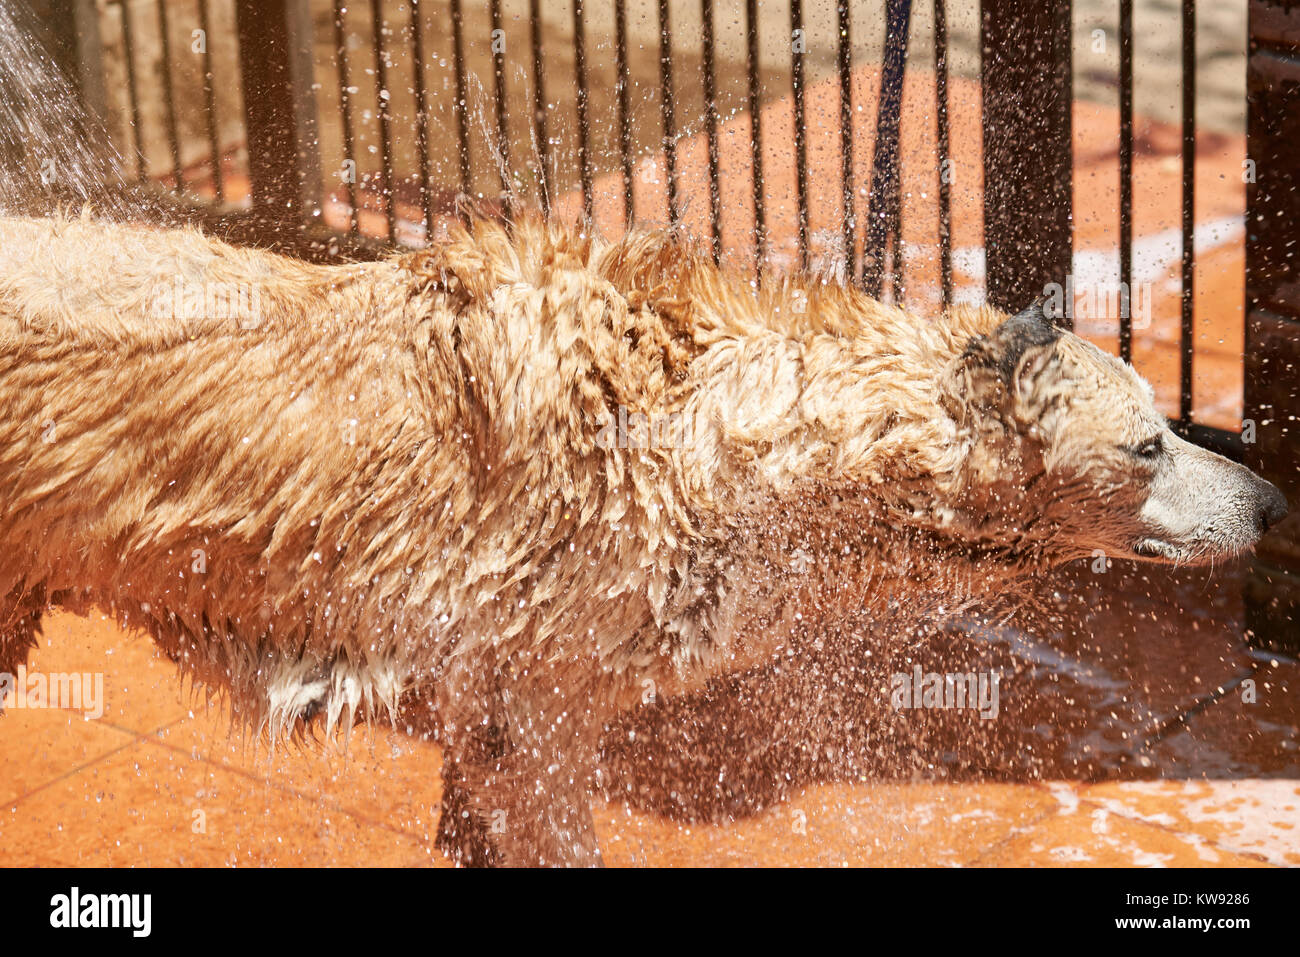 Drops flying from wet dog fur. Washing brown big dog view from side Stock Photo